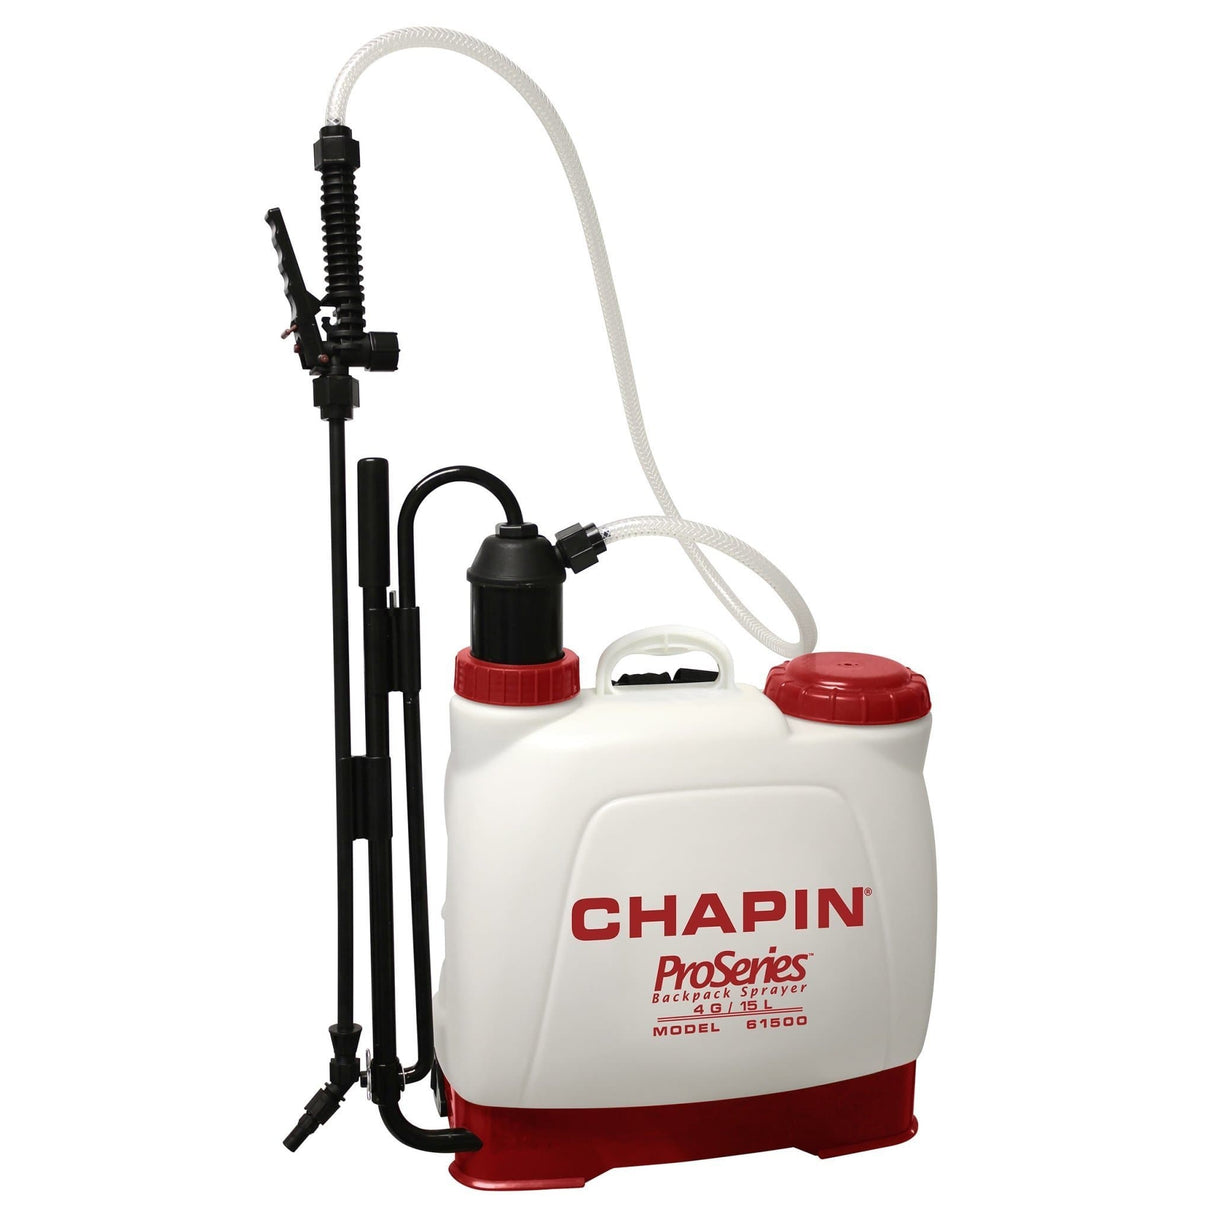 15 Litre - Chapin Pro Series Sprayer - With Chemical Resistant FKM Seals